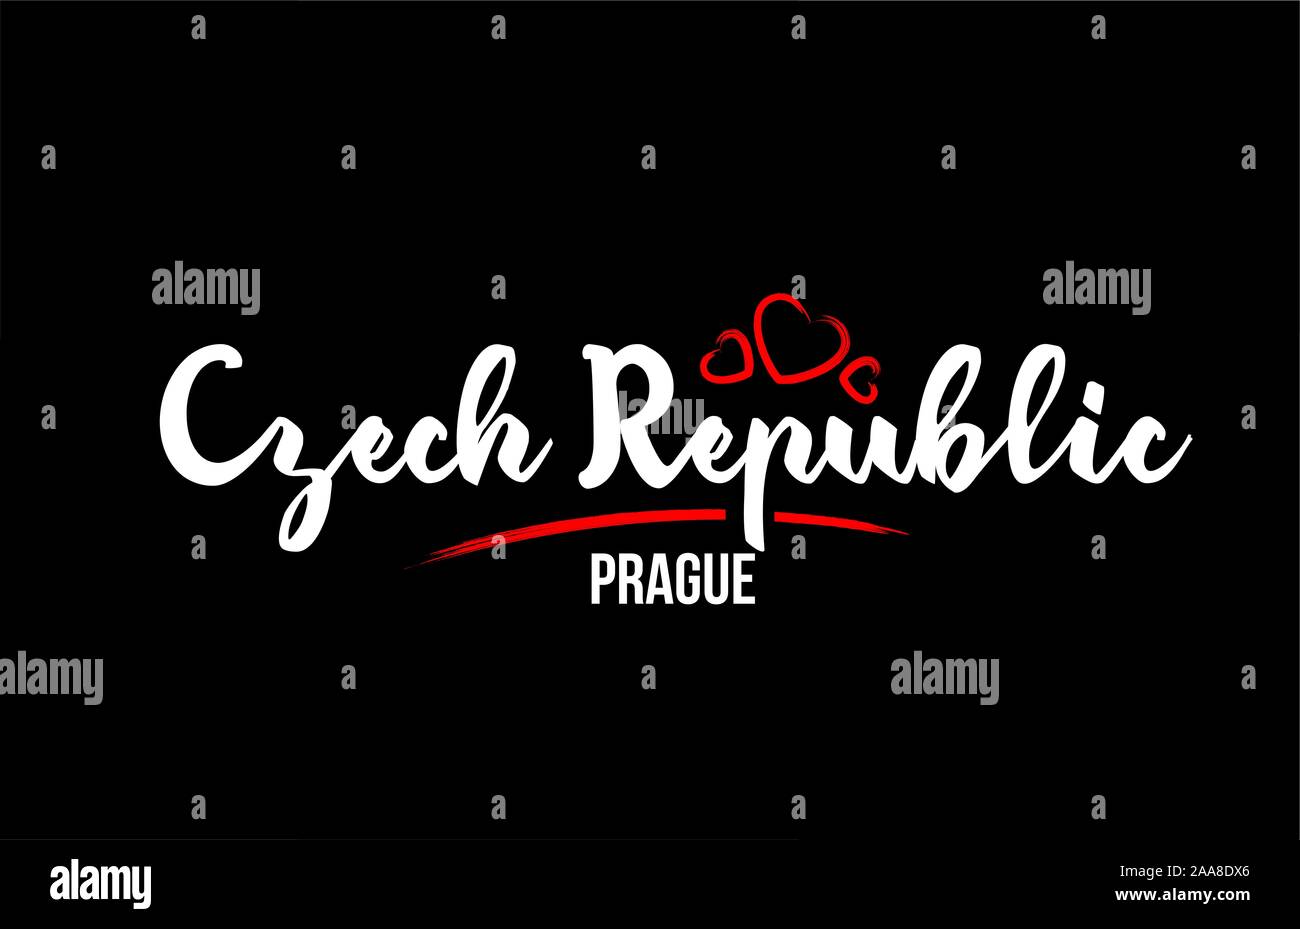 Czech Republic country on black background with red love heart and its capital Prague creative typography text logo design Stock Vector